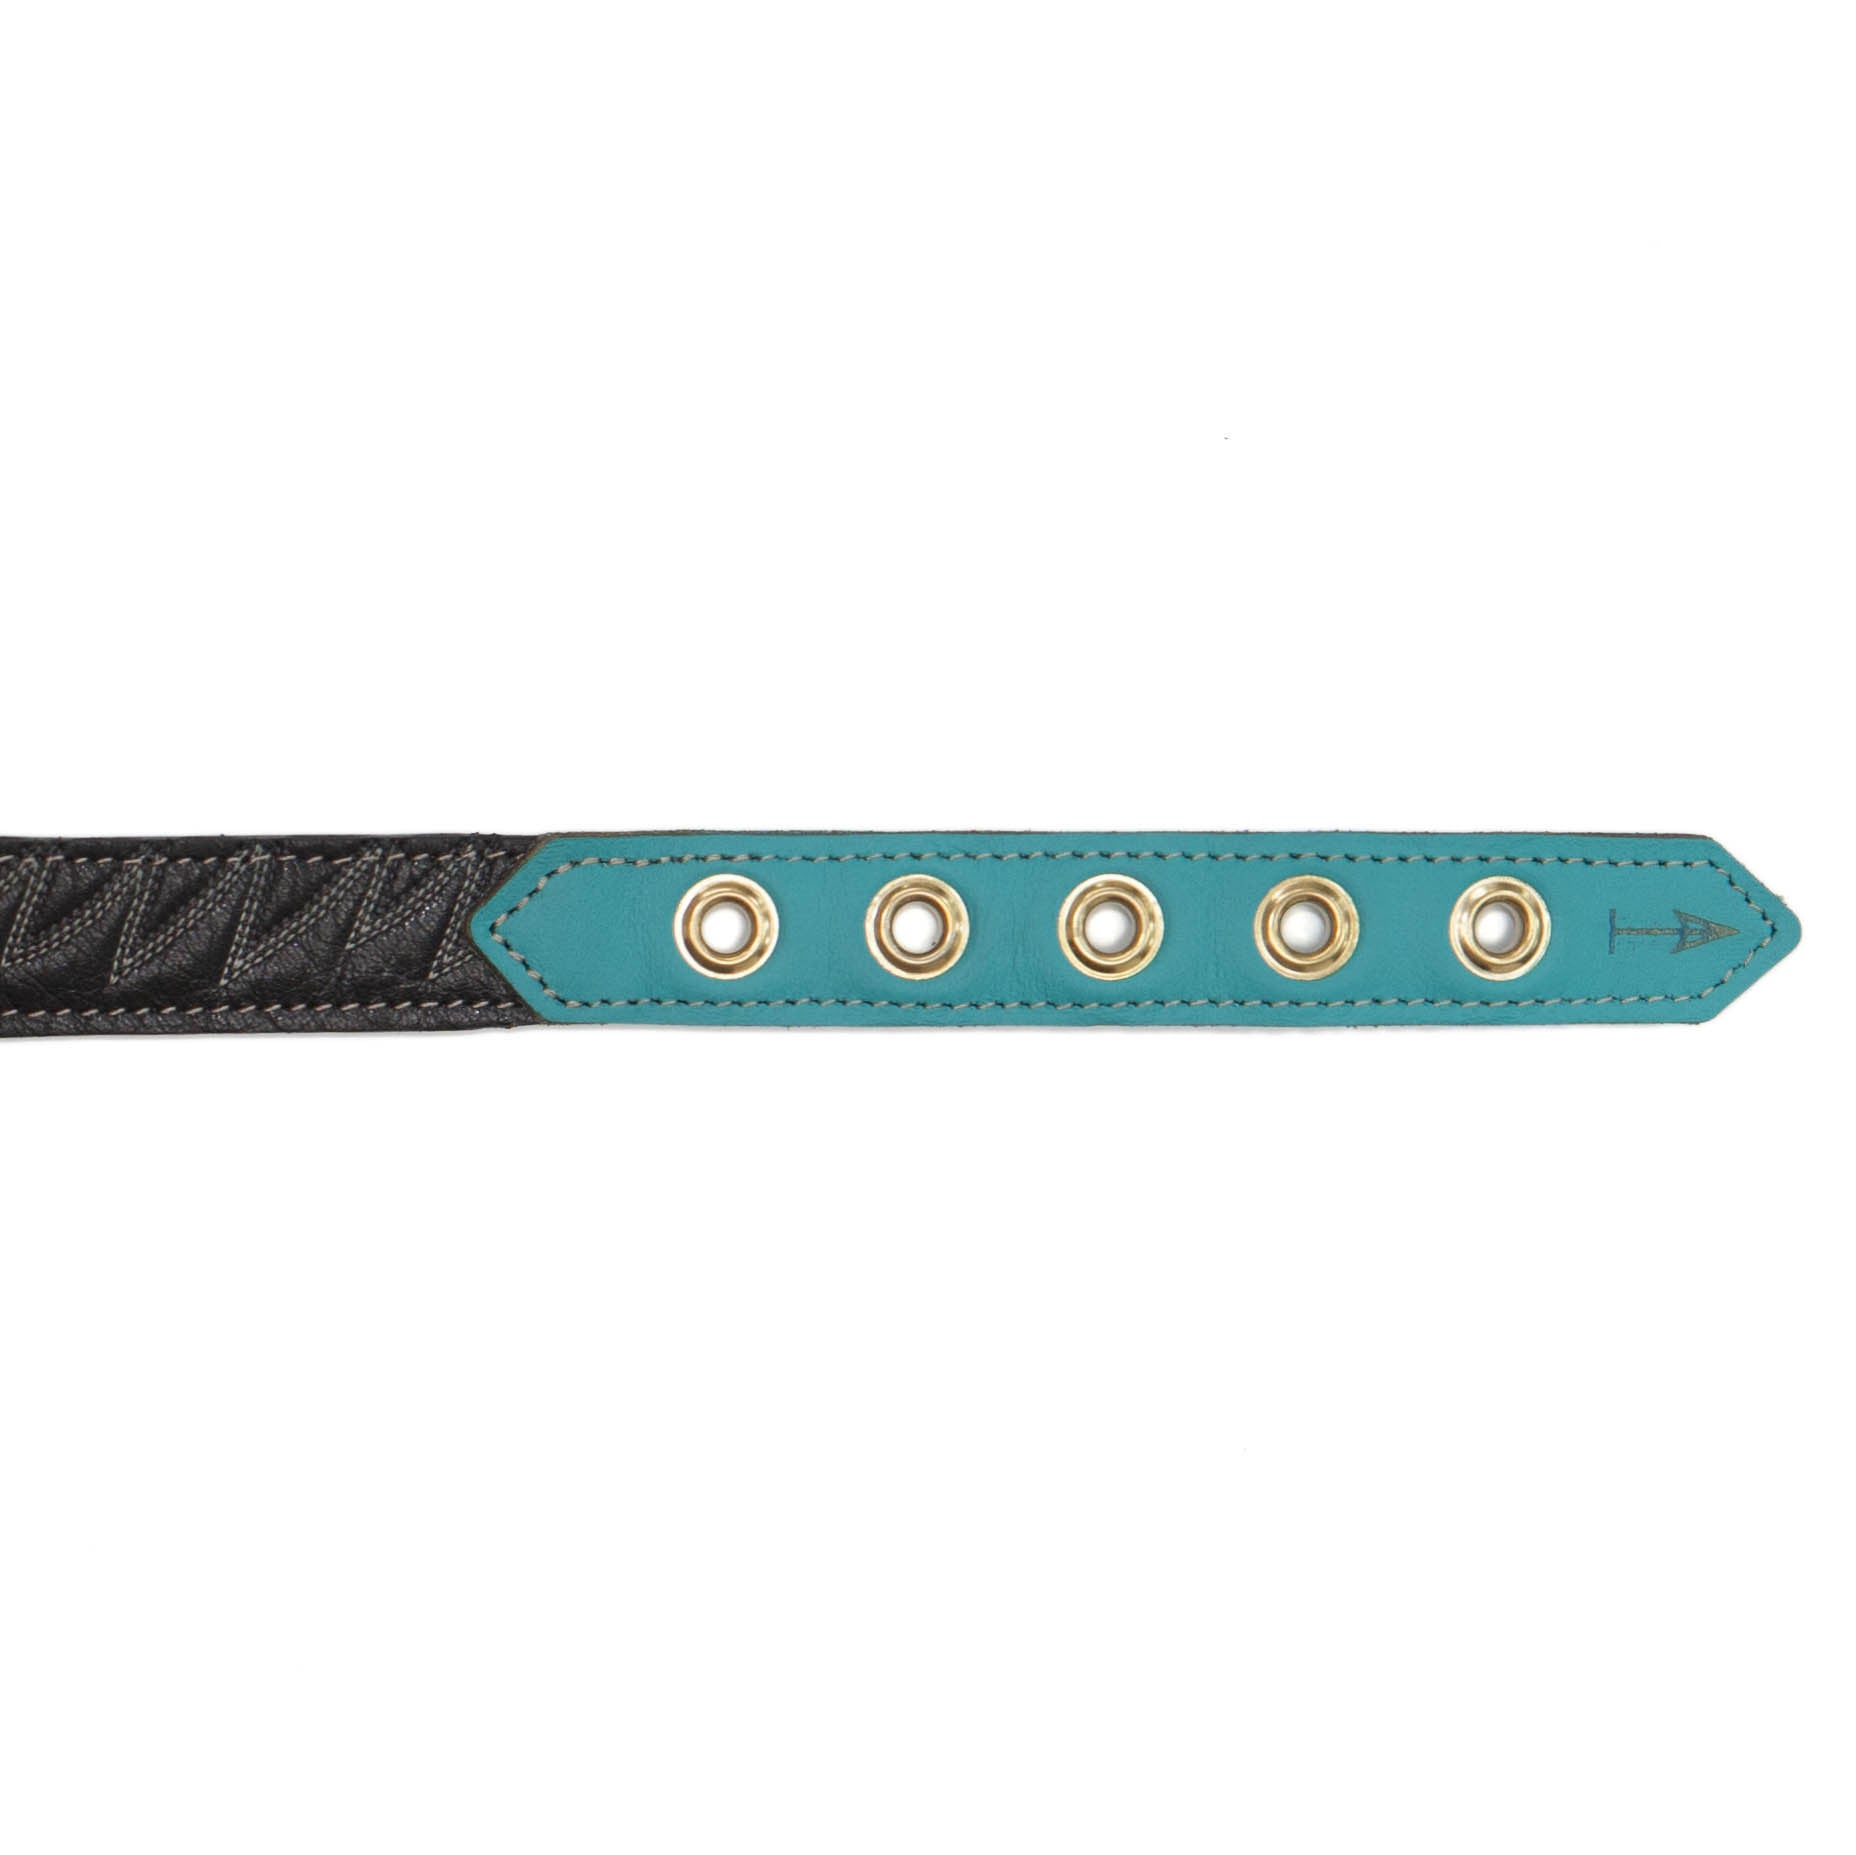 Turquoise Dog Collar with Black Leather + White Spike Stitching (clasp)